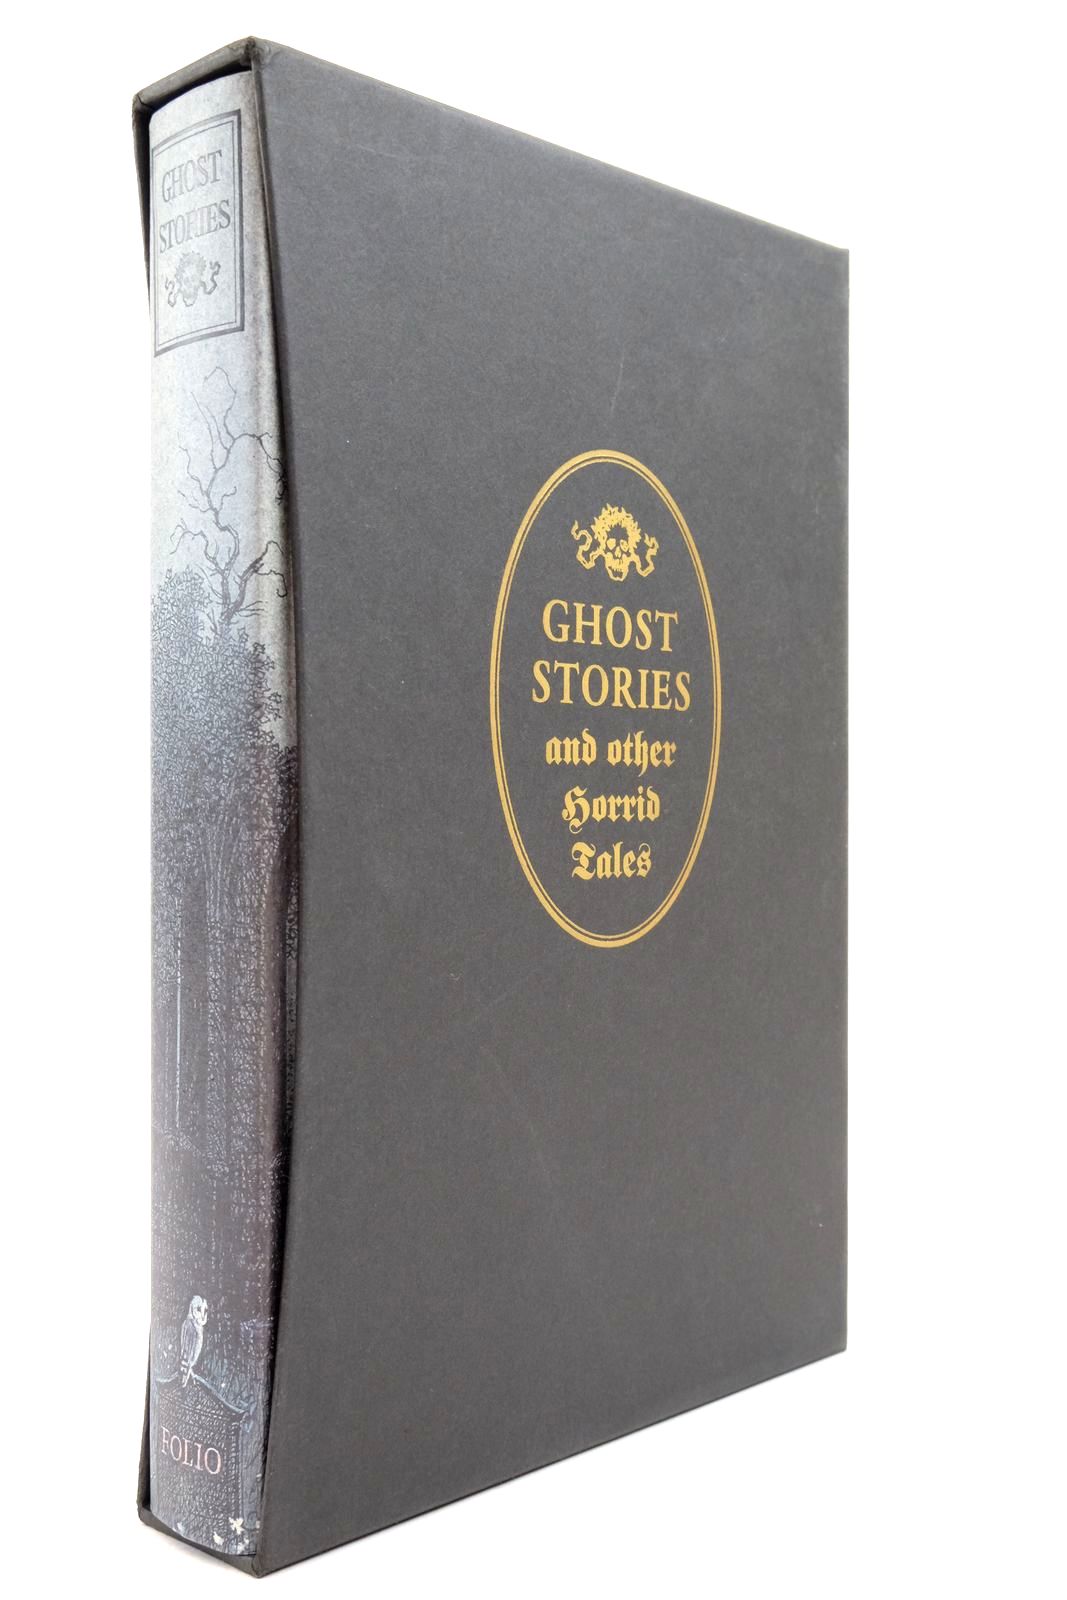 Photo of GHOST STORIES AND OTHER HORRID TALES written by Stewart, Charles W. Le Fanu, J. Sheridan Stevenson, Robert Louis Hearn, Lafcadio et al,  illustrated by Stewart, Charles W. published by Folio Society (STOCK CODE: 2138769)  for sale by Stella & Rose's Books